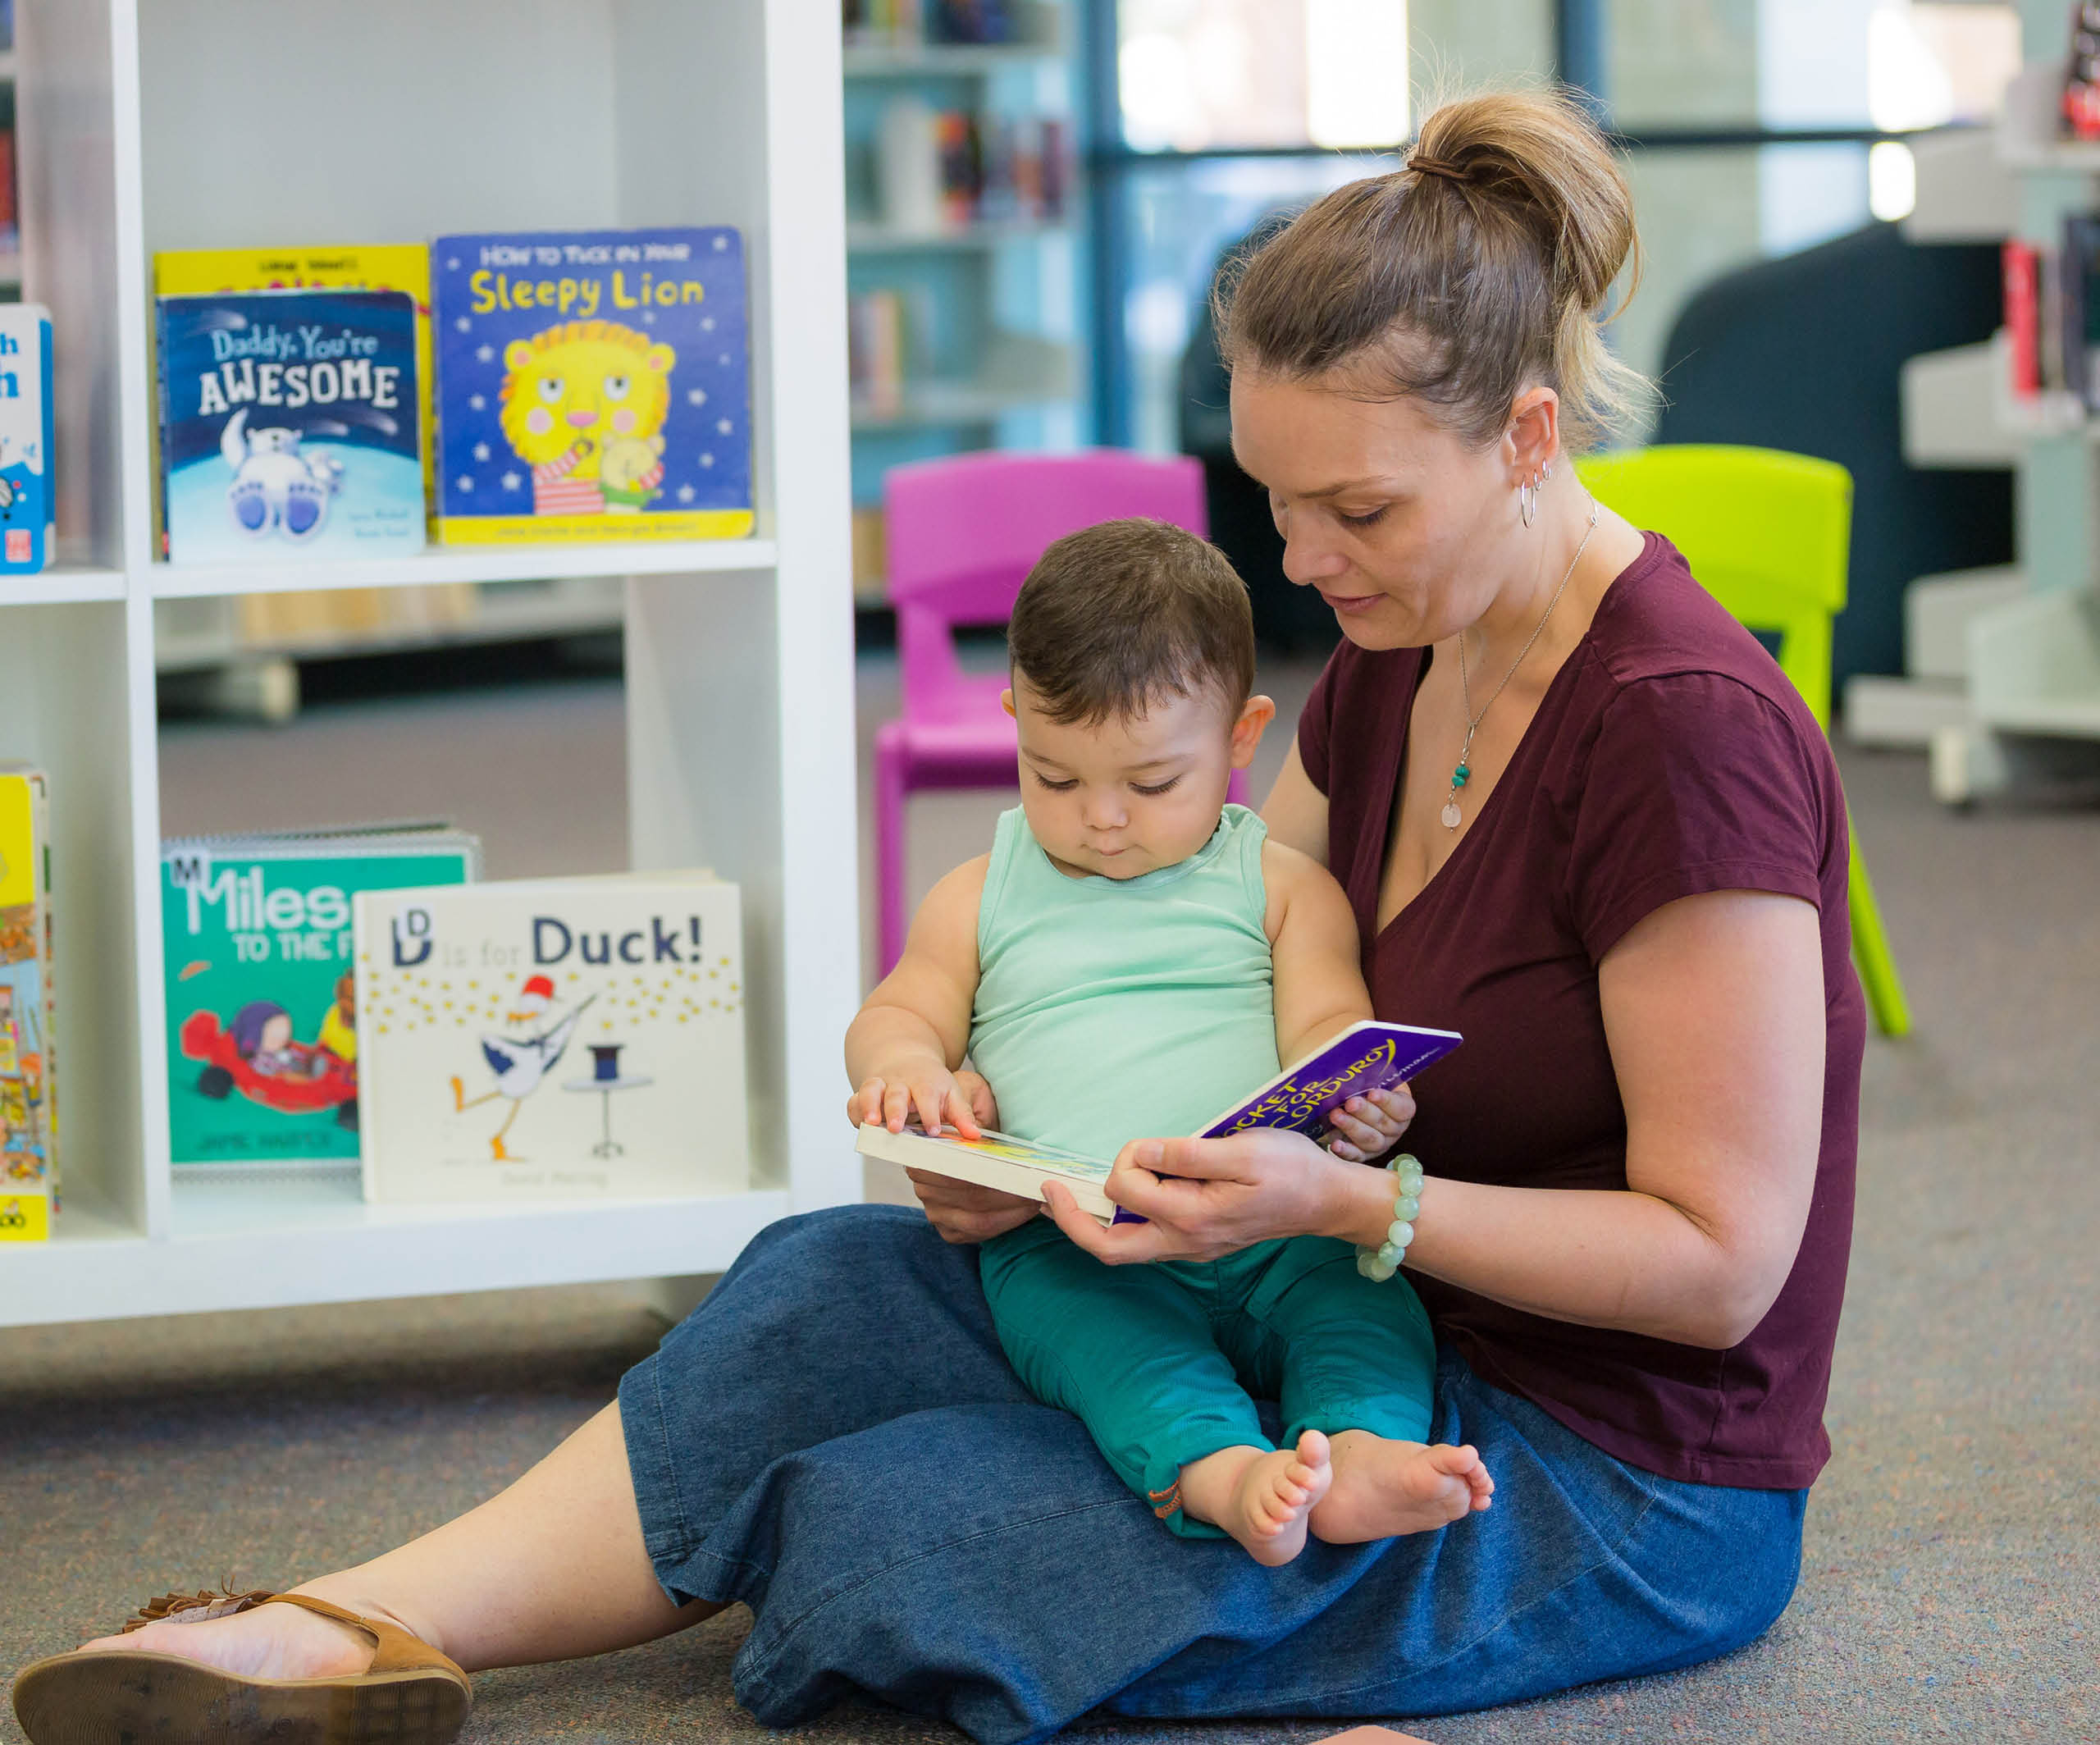 Rhymetime is held at Cronulla Library on Wednesday afternoons at 2pm during school terms. Suitable for babies aged 0 to 24 months and their parents.